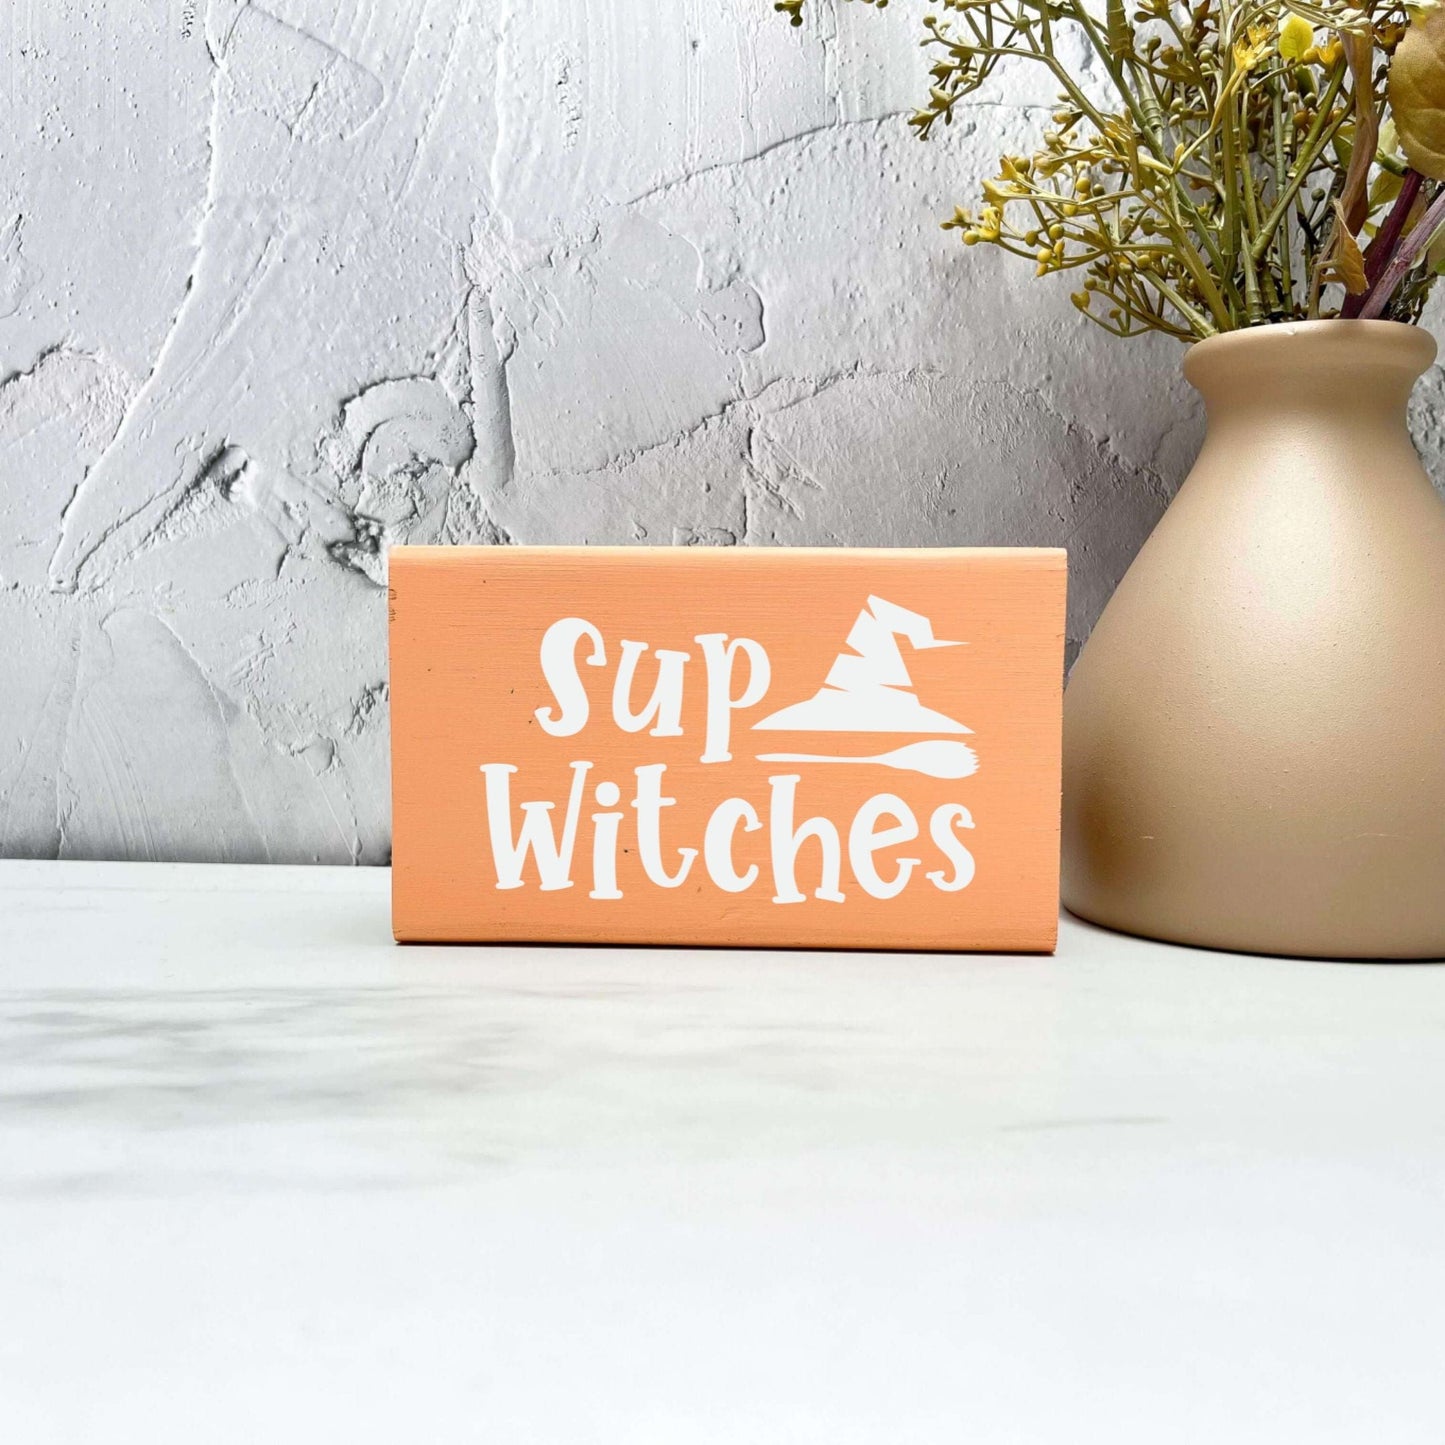 Sup witches Sign, Halloween Wood Sign, Halloween Home Decor, Spooky Decor